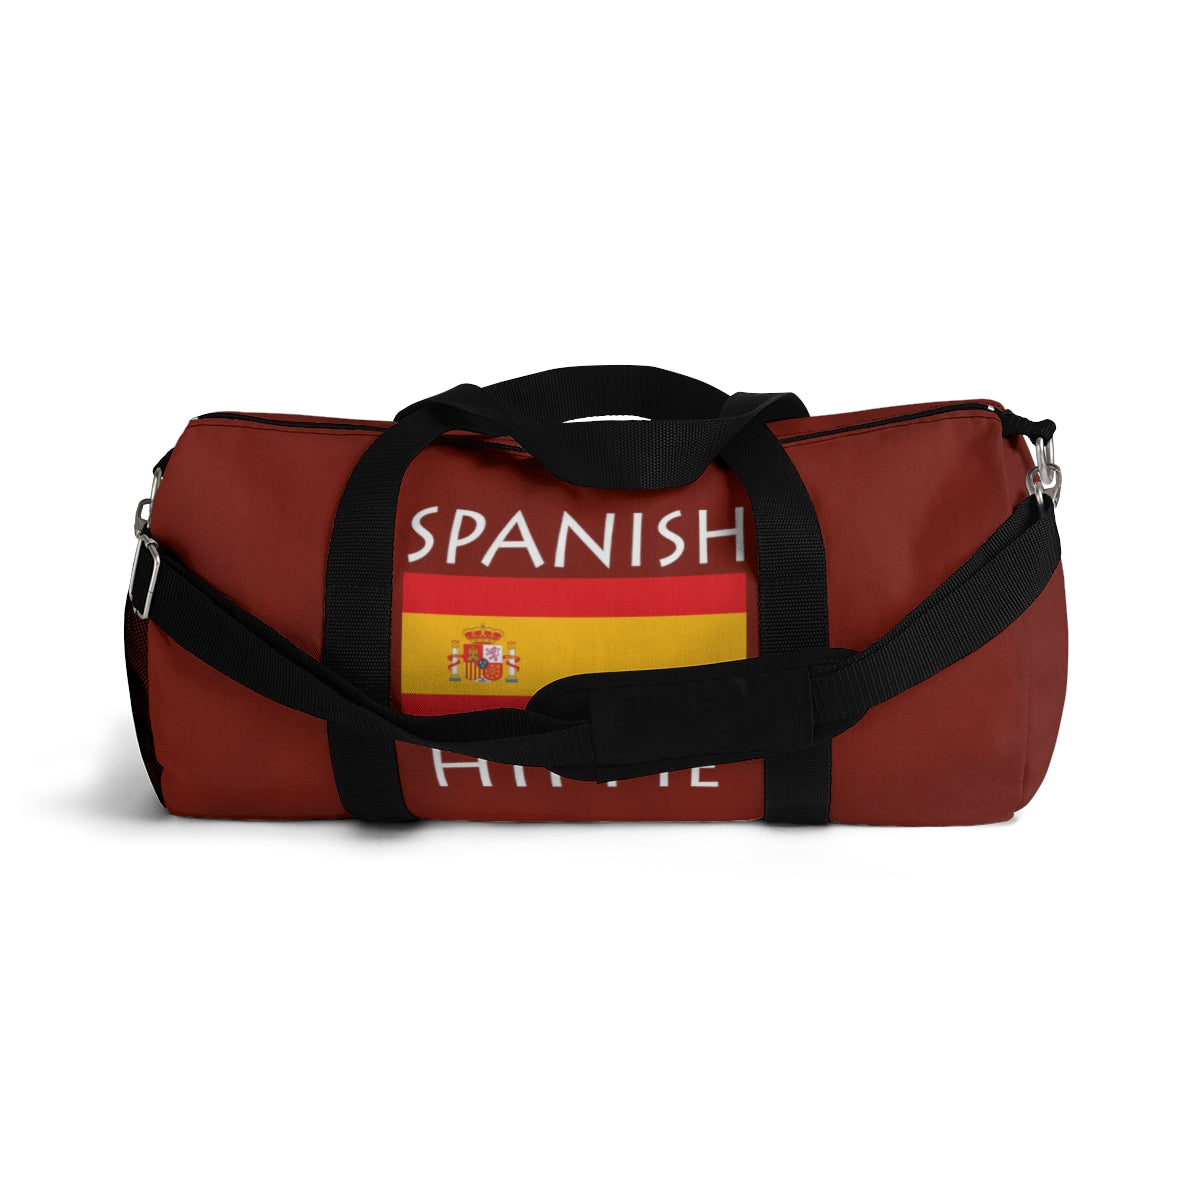   Stately Wear's Spanish Flag Hippie duffel bag is colorful, iconic and stylish. We are a Katie Couric Shop partner. This duffel bag is the perfect accessory as a beach bag, ski bag, travel bag, shopping bag & gym bag, Pilates bag or yoga bag. Custom made one-at-a-time with environmentally friendly biodegradable inks & dyes. 2 sizes to choose. Stately Wear's bags are very durable, soft and colorful duffels with durable straps.